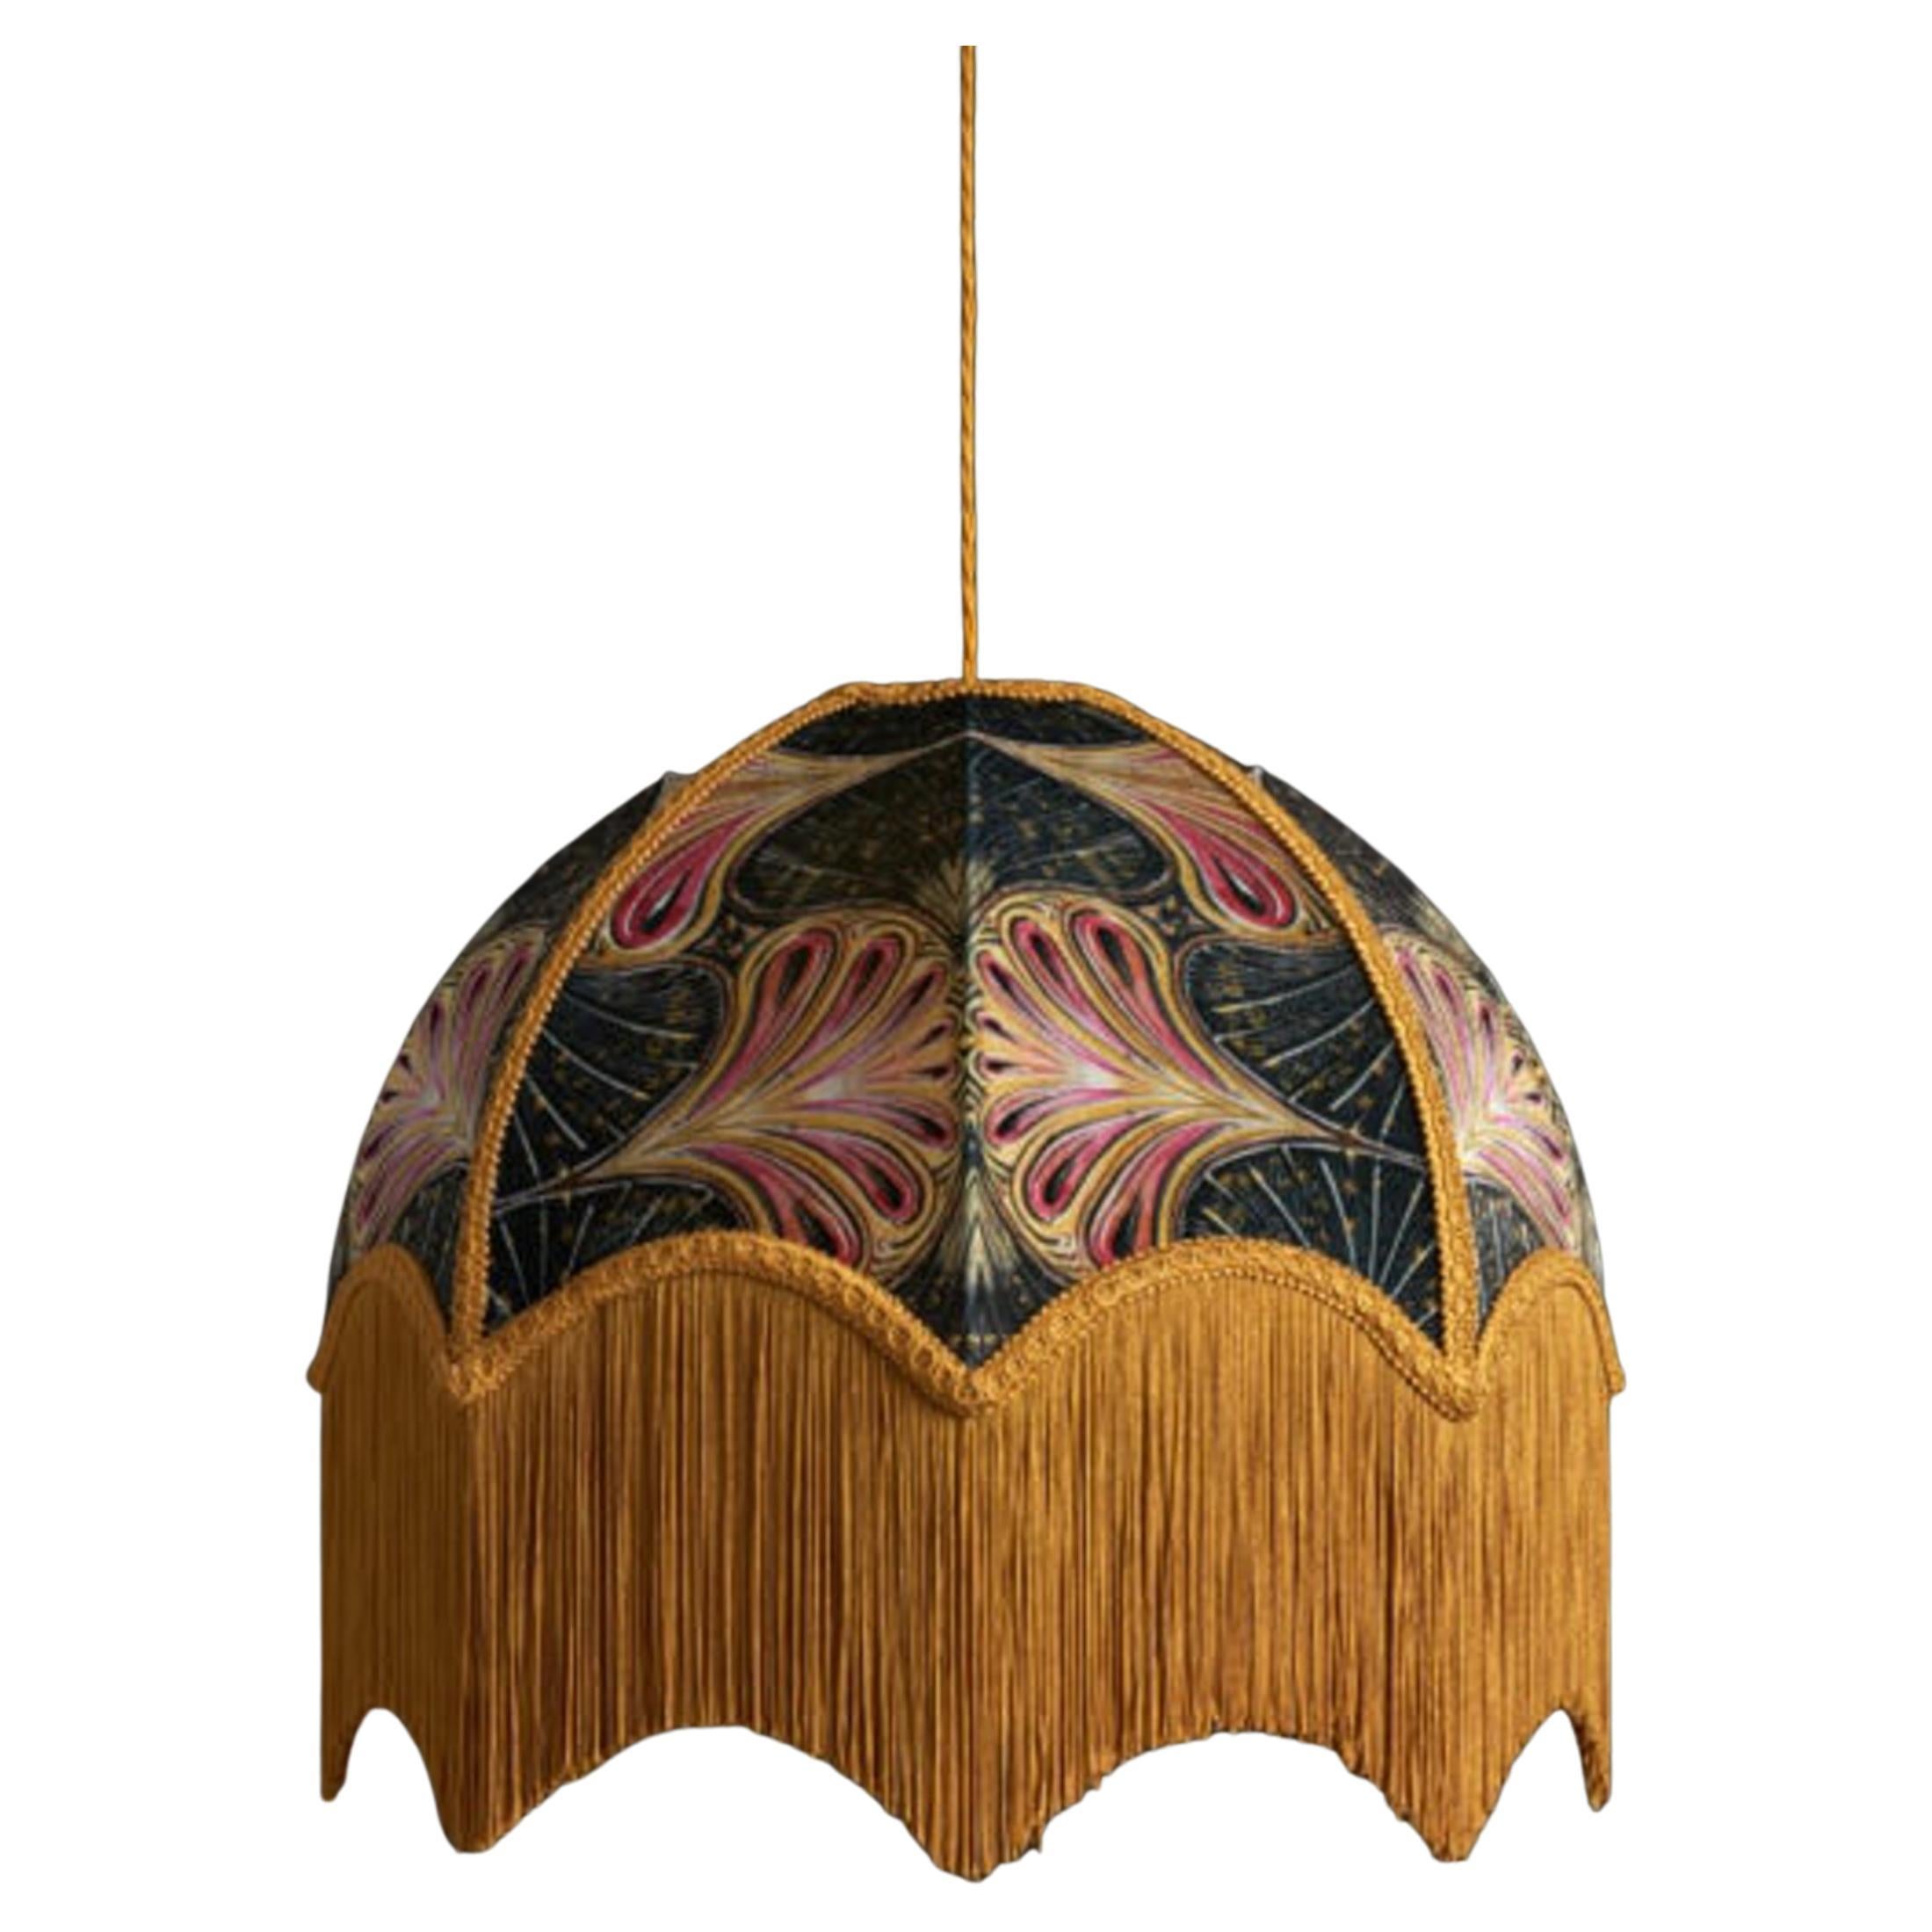 Showgirl Lampshade with Fringing - Small (14")